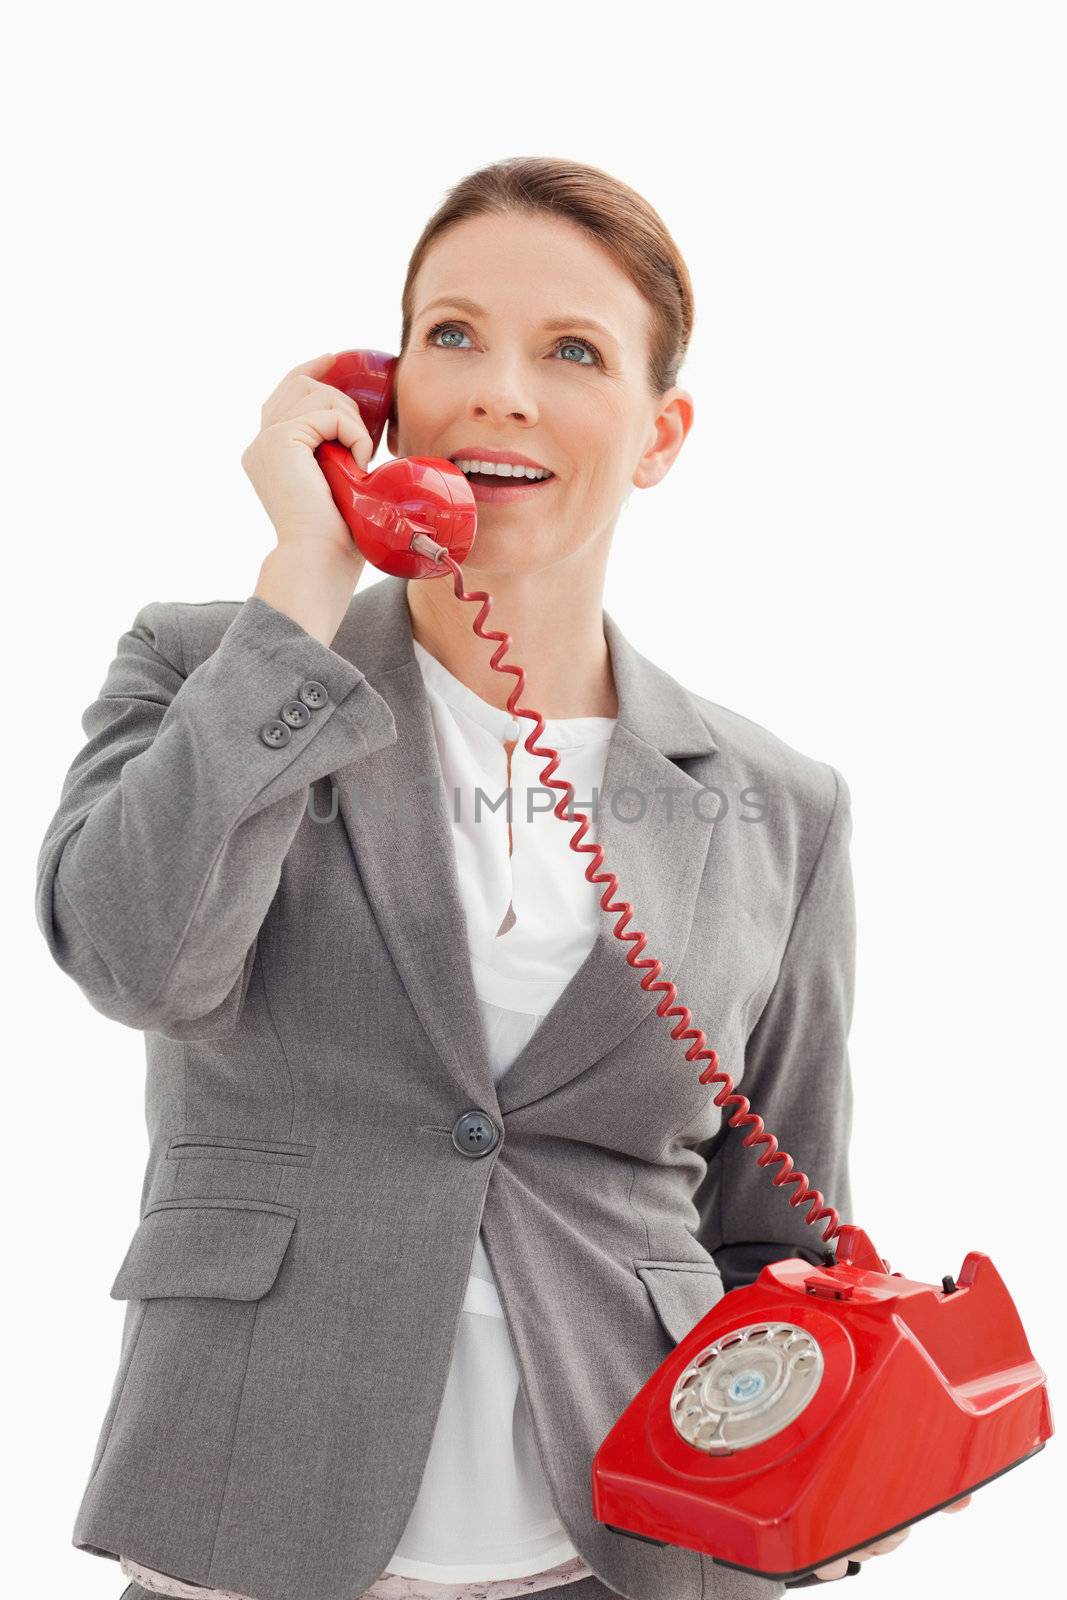 excited businesswoman talking on the phone by Wavebreakmedia